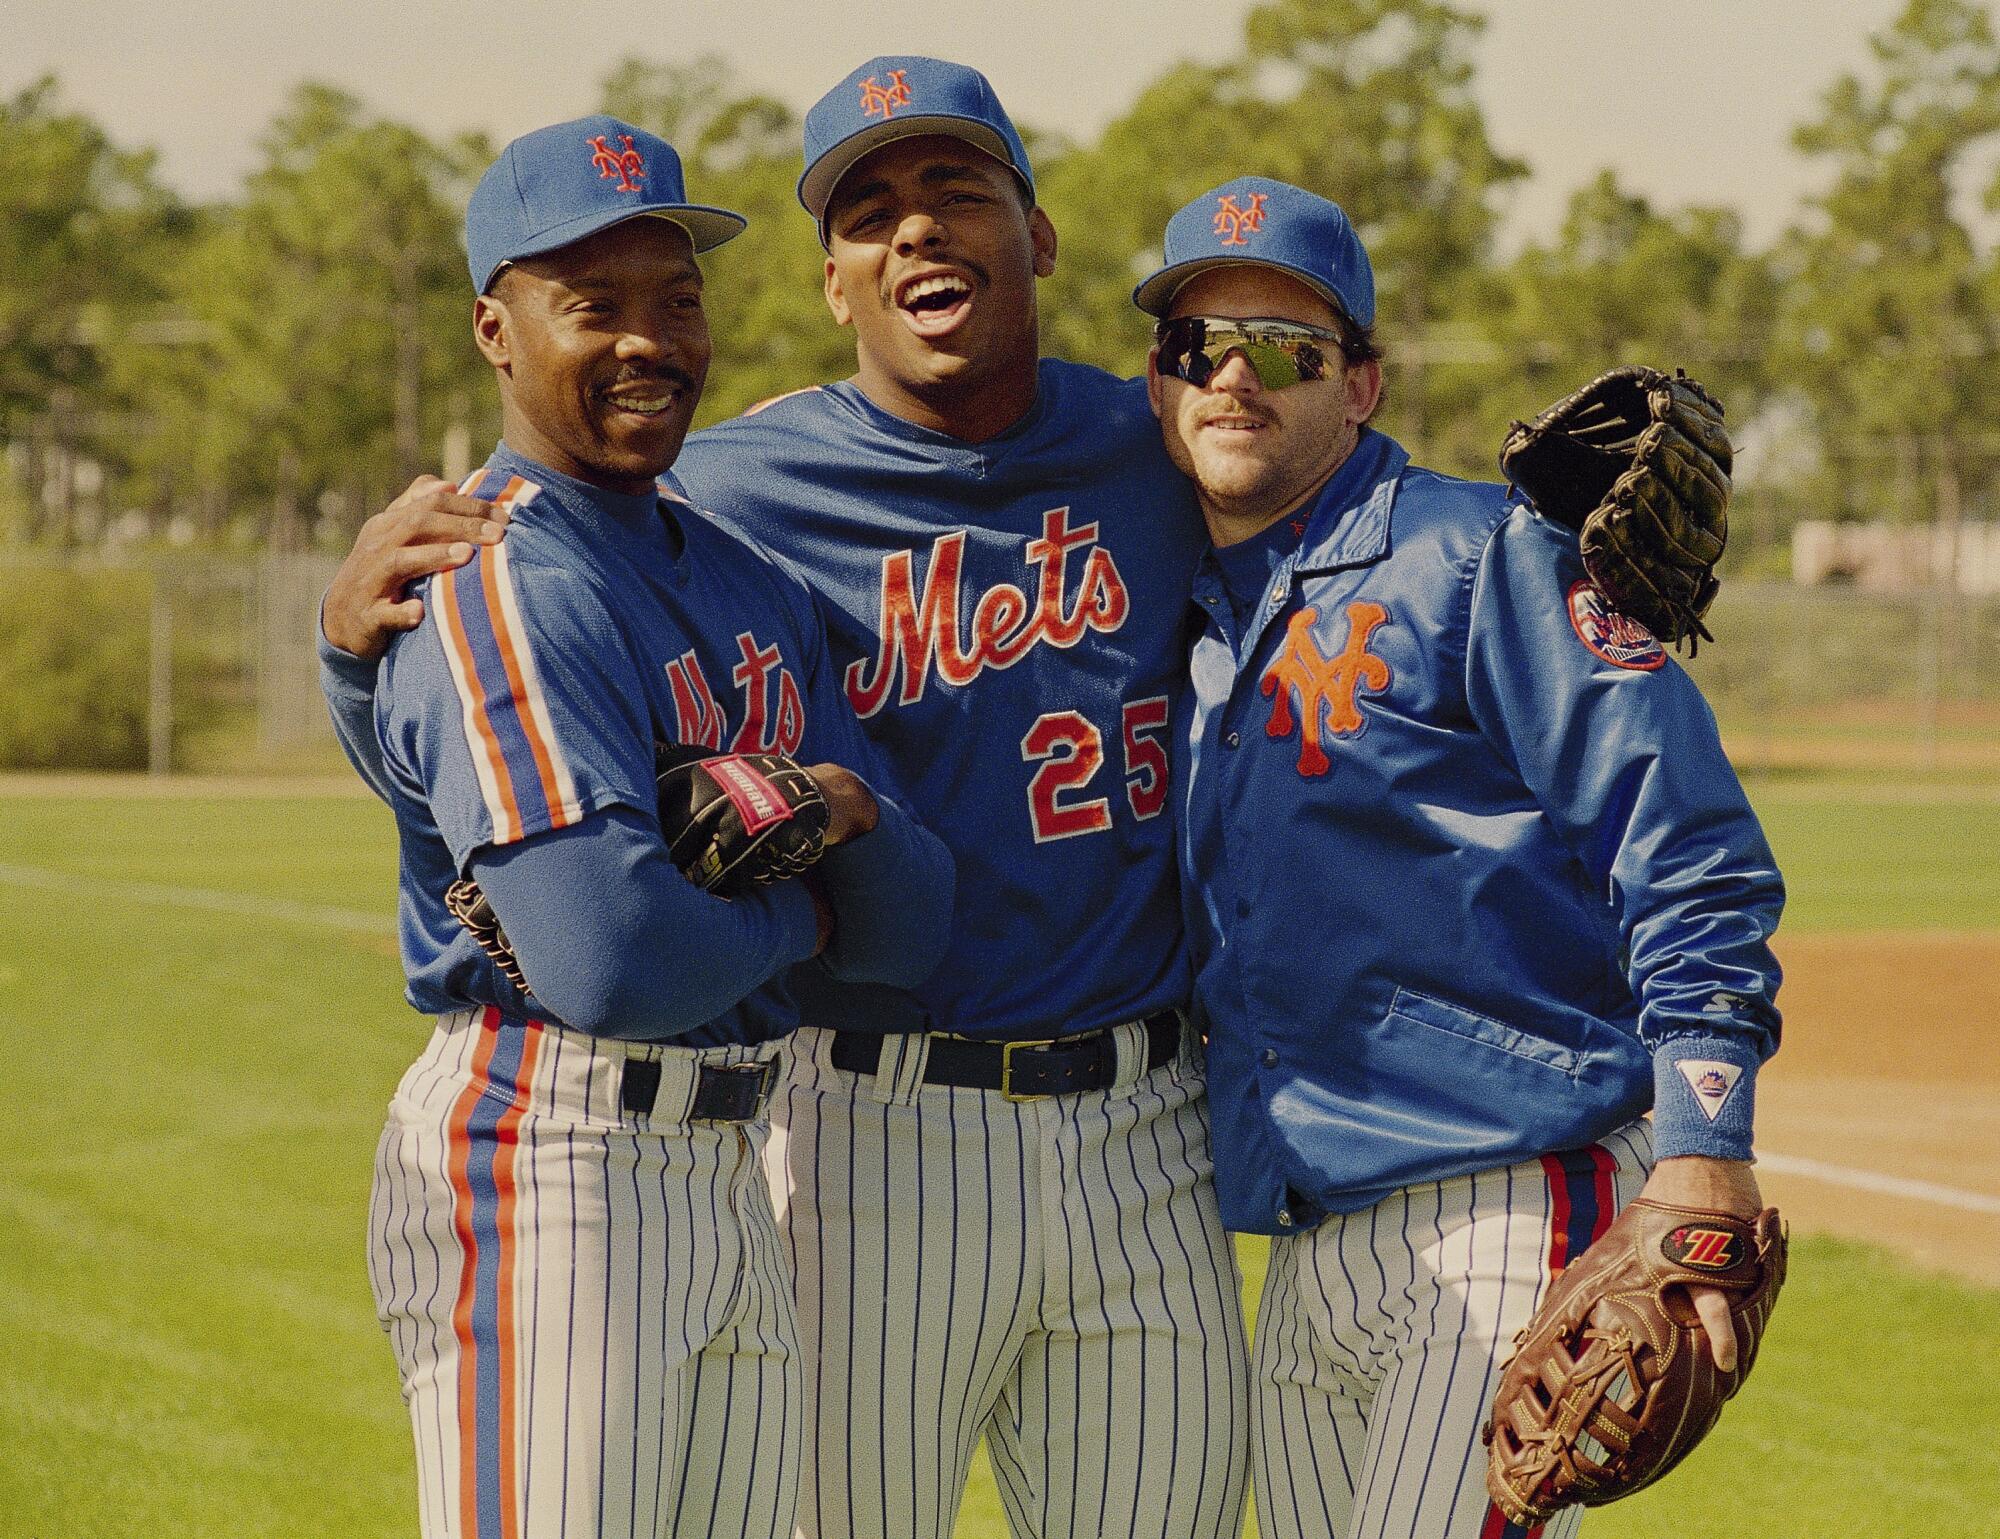 New York Mets outfielders (from left) Vince Coleman, Bobby Bonilla and infielder Howard Johnson pose.